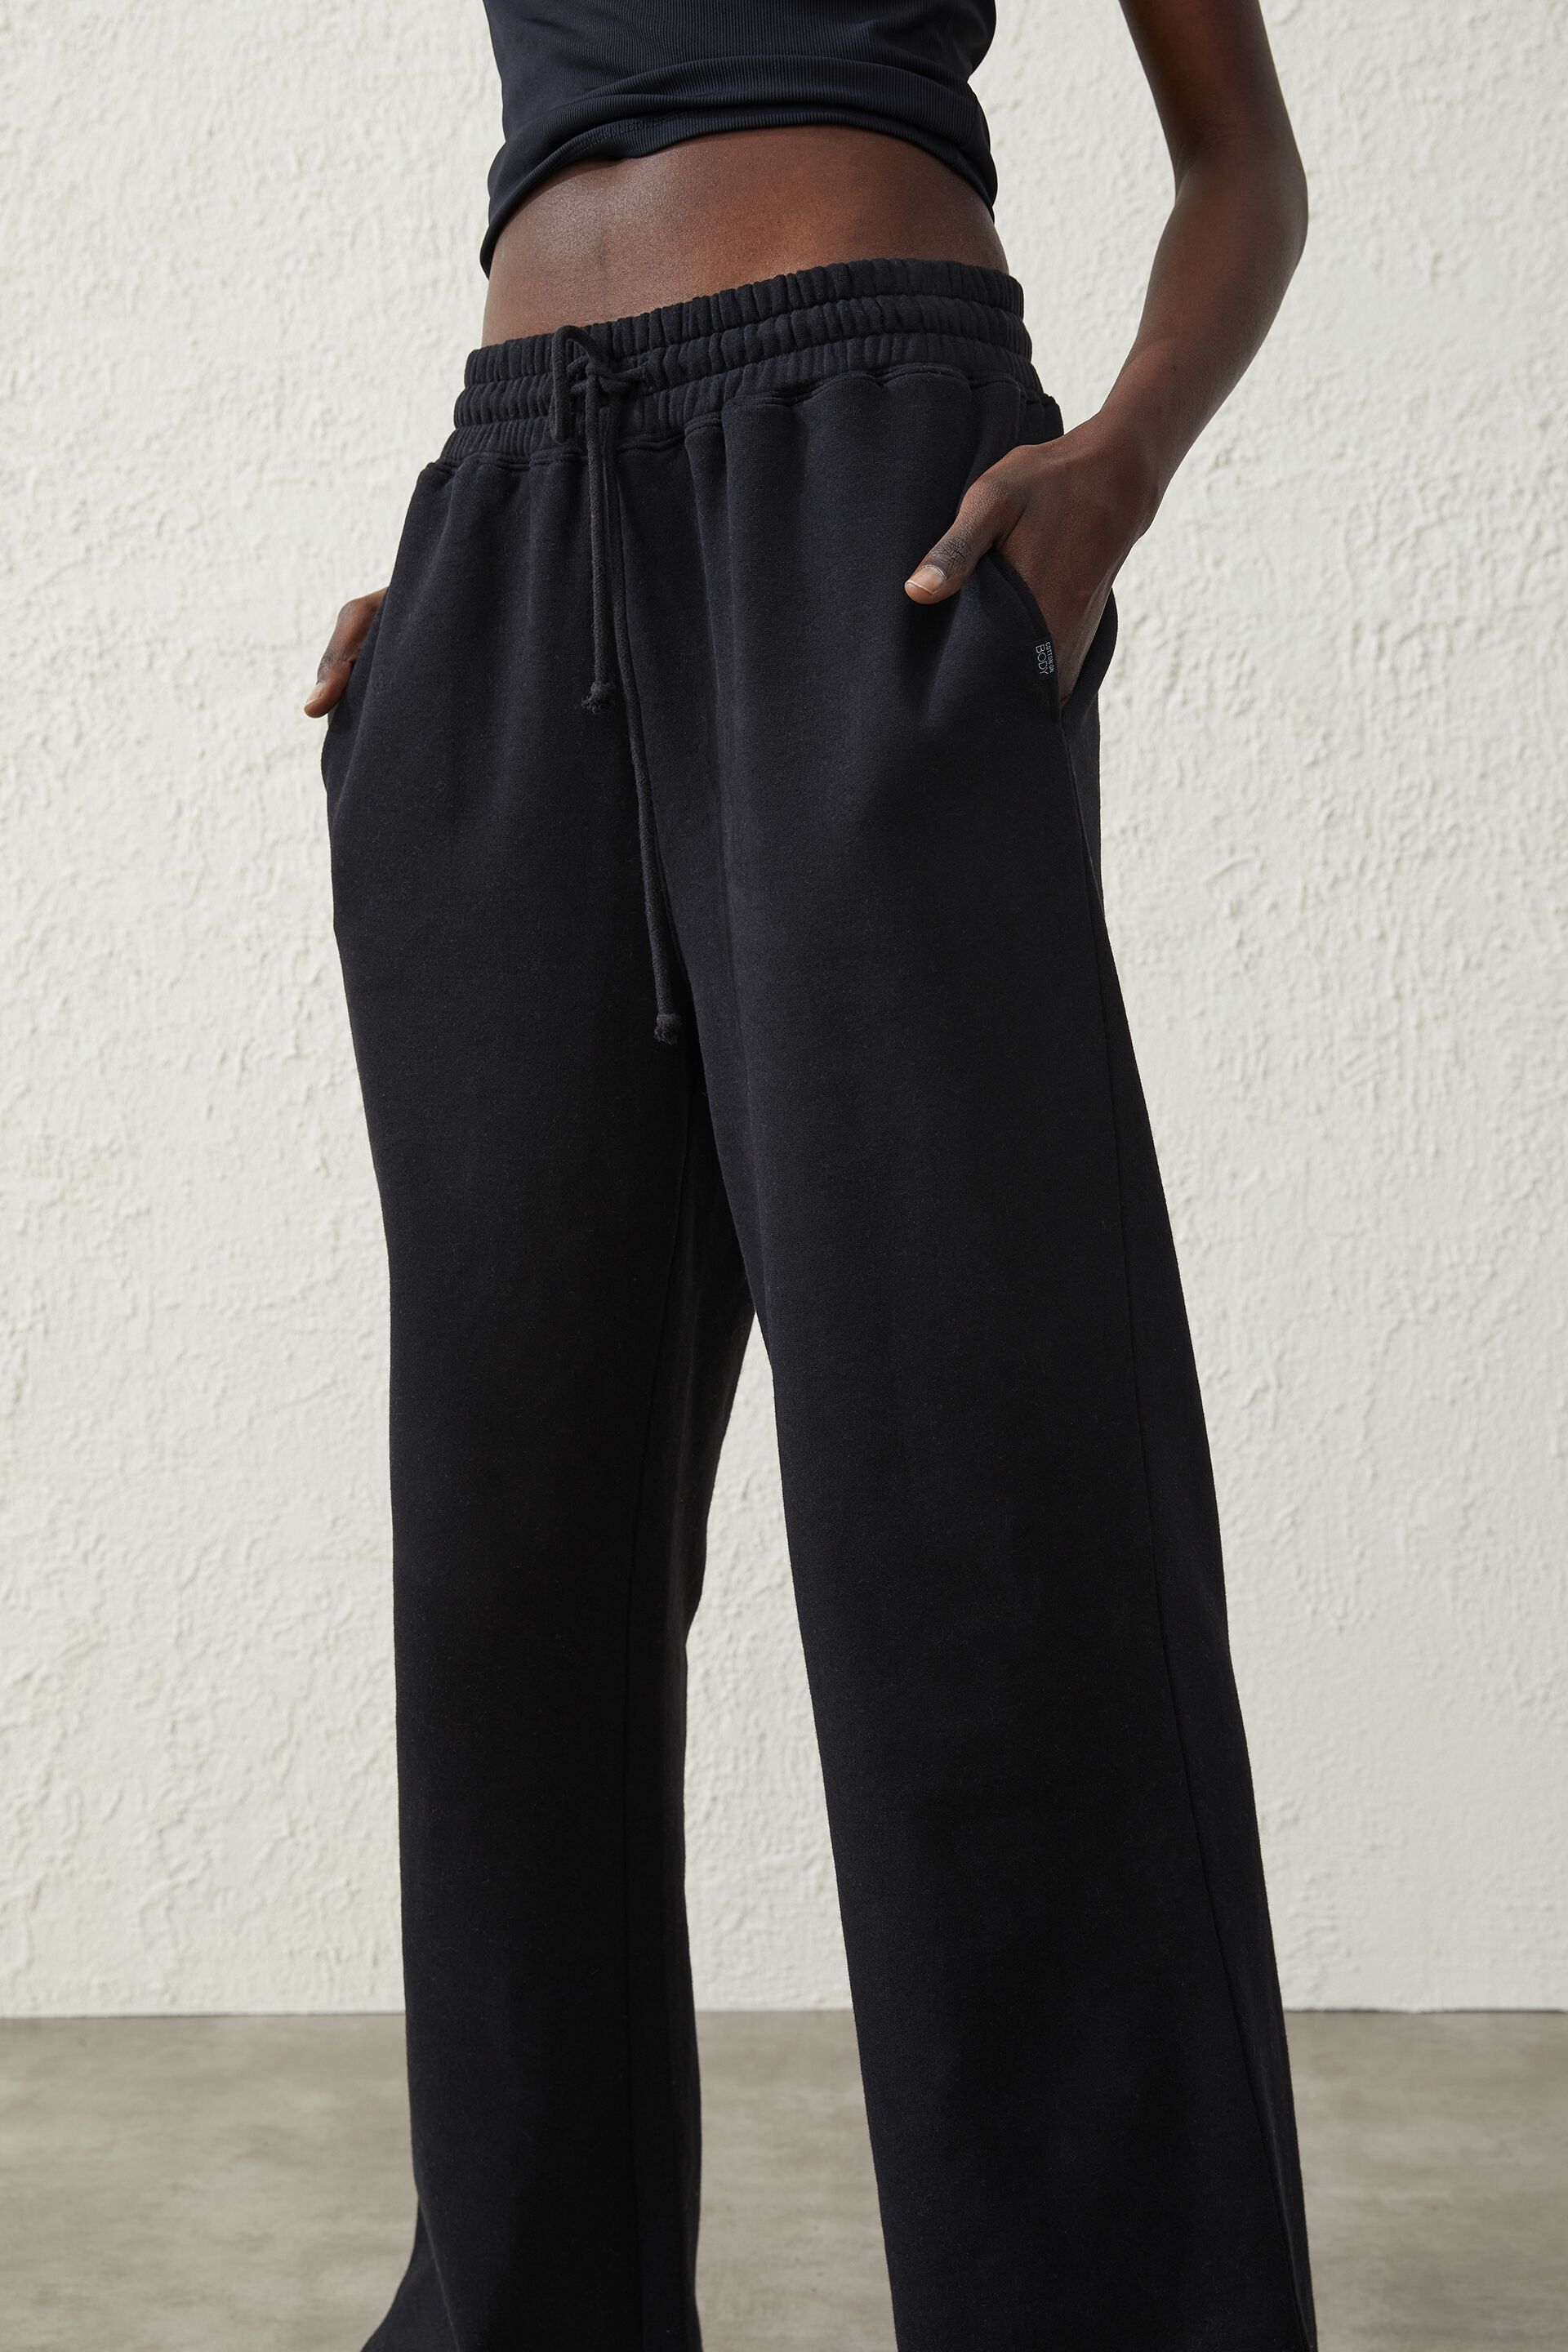 Y-3 Classic Straight Leg Track Pants - Black - FN3383 | OUTBACK Sylt